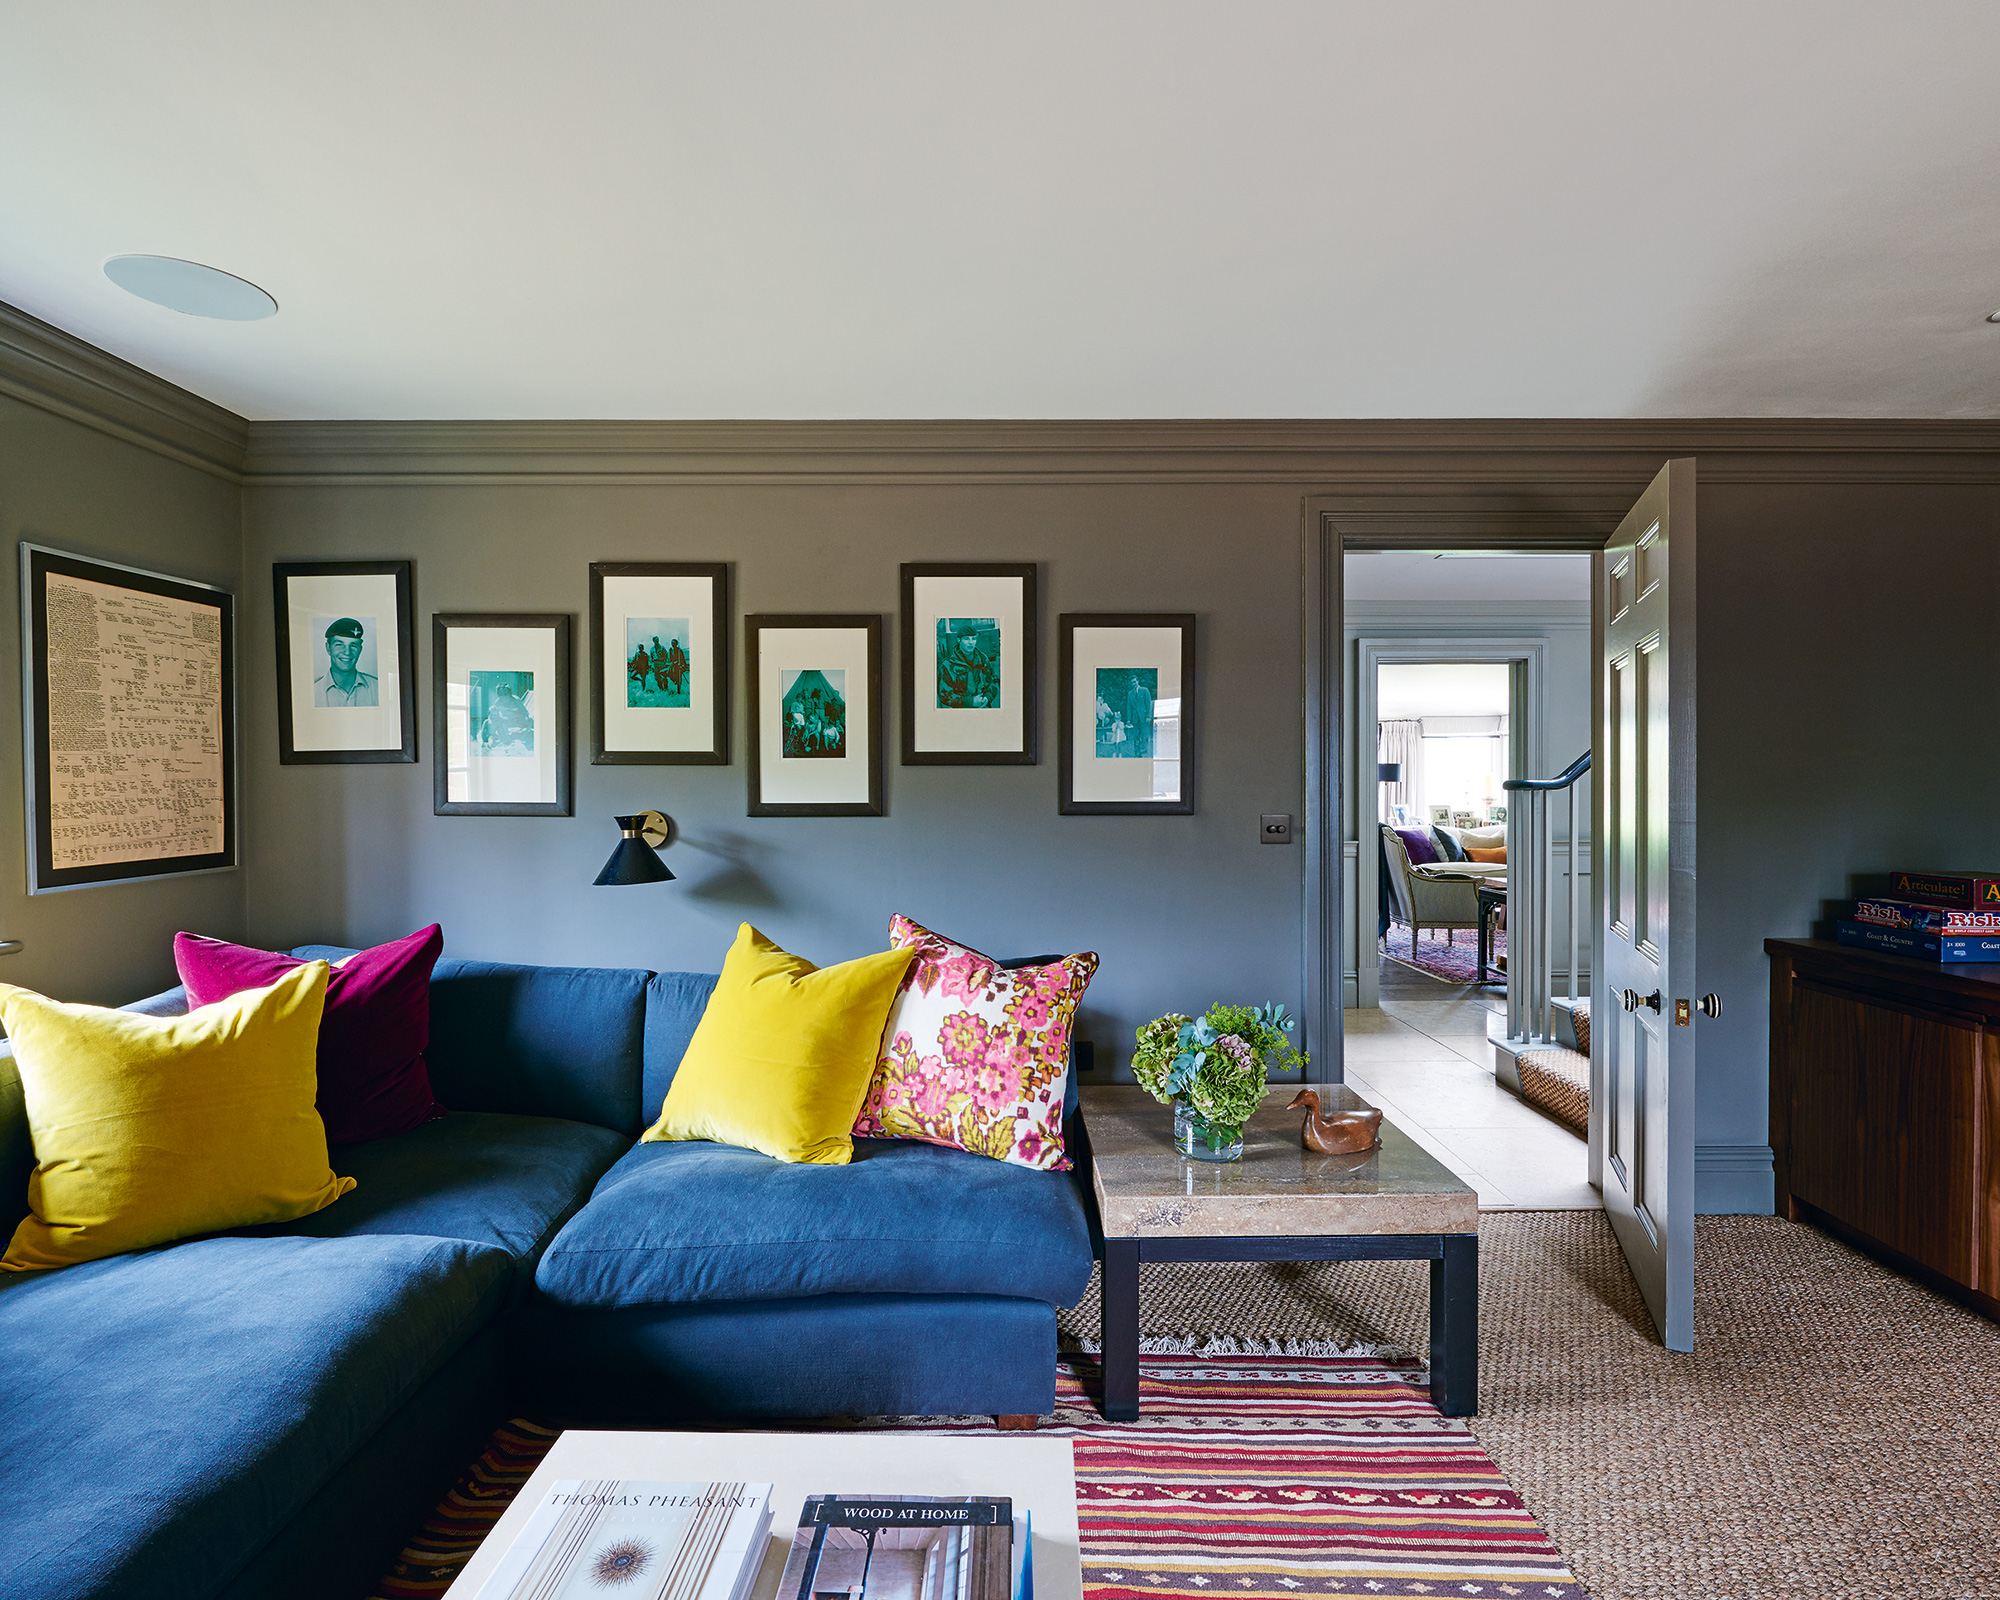 Grey living room ideas with a large blue sofa, yellow and pink cushions and gallery wall.